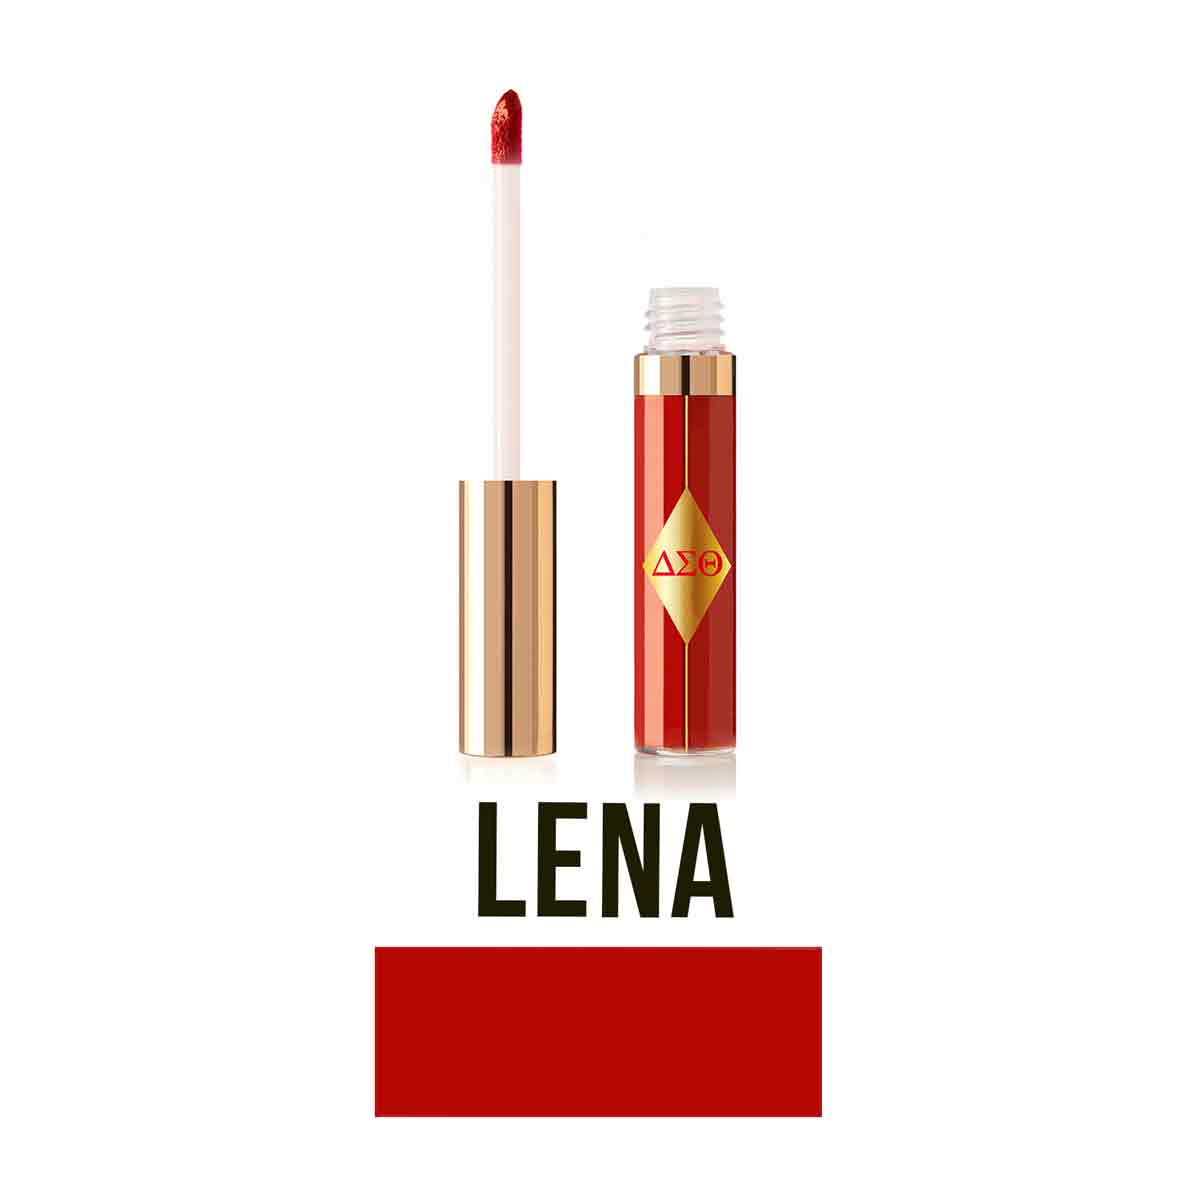 Lena is a high-shine, classic true Red liquid lip gloss with an unforgettable luminous finish that lasts for 6 hours without transferring. This color celebrates the life and legacy of the incomparable Lena Horne. 